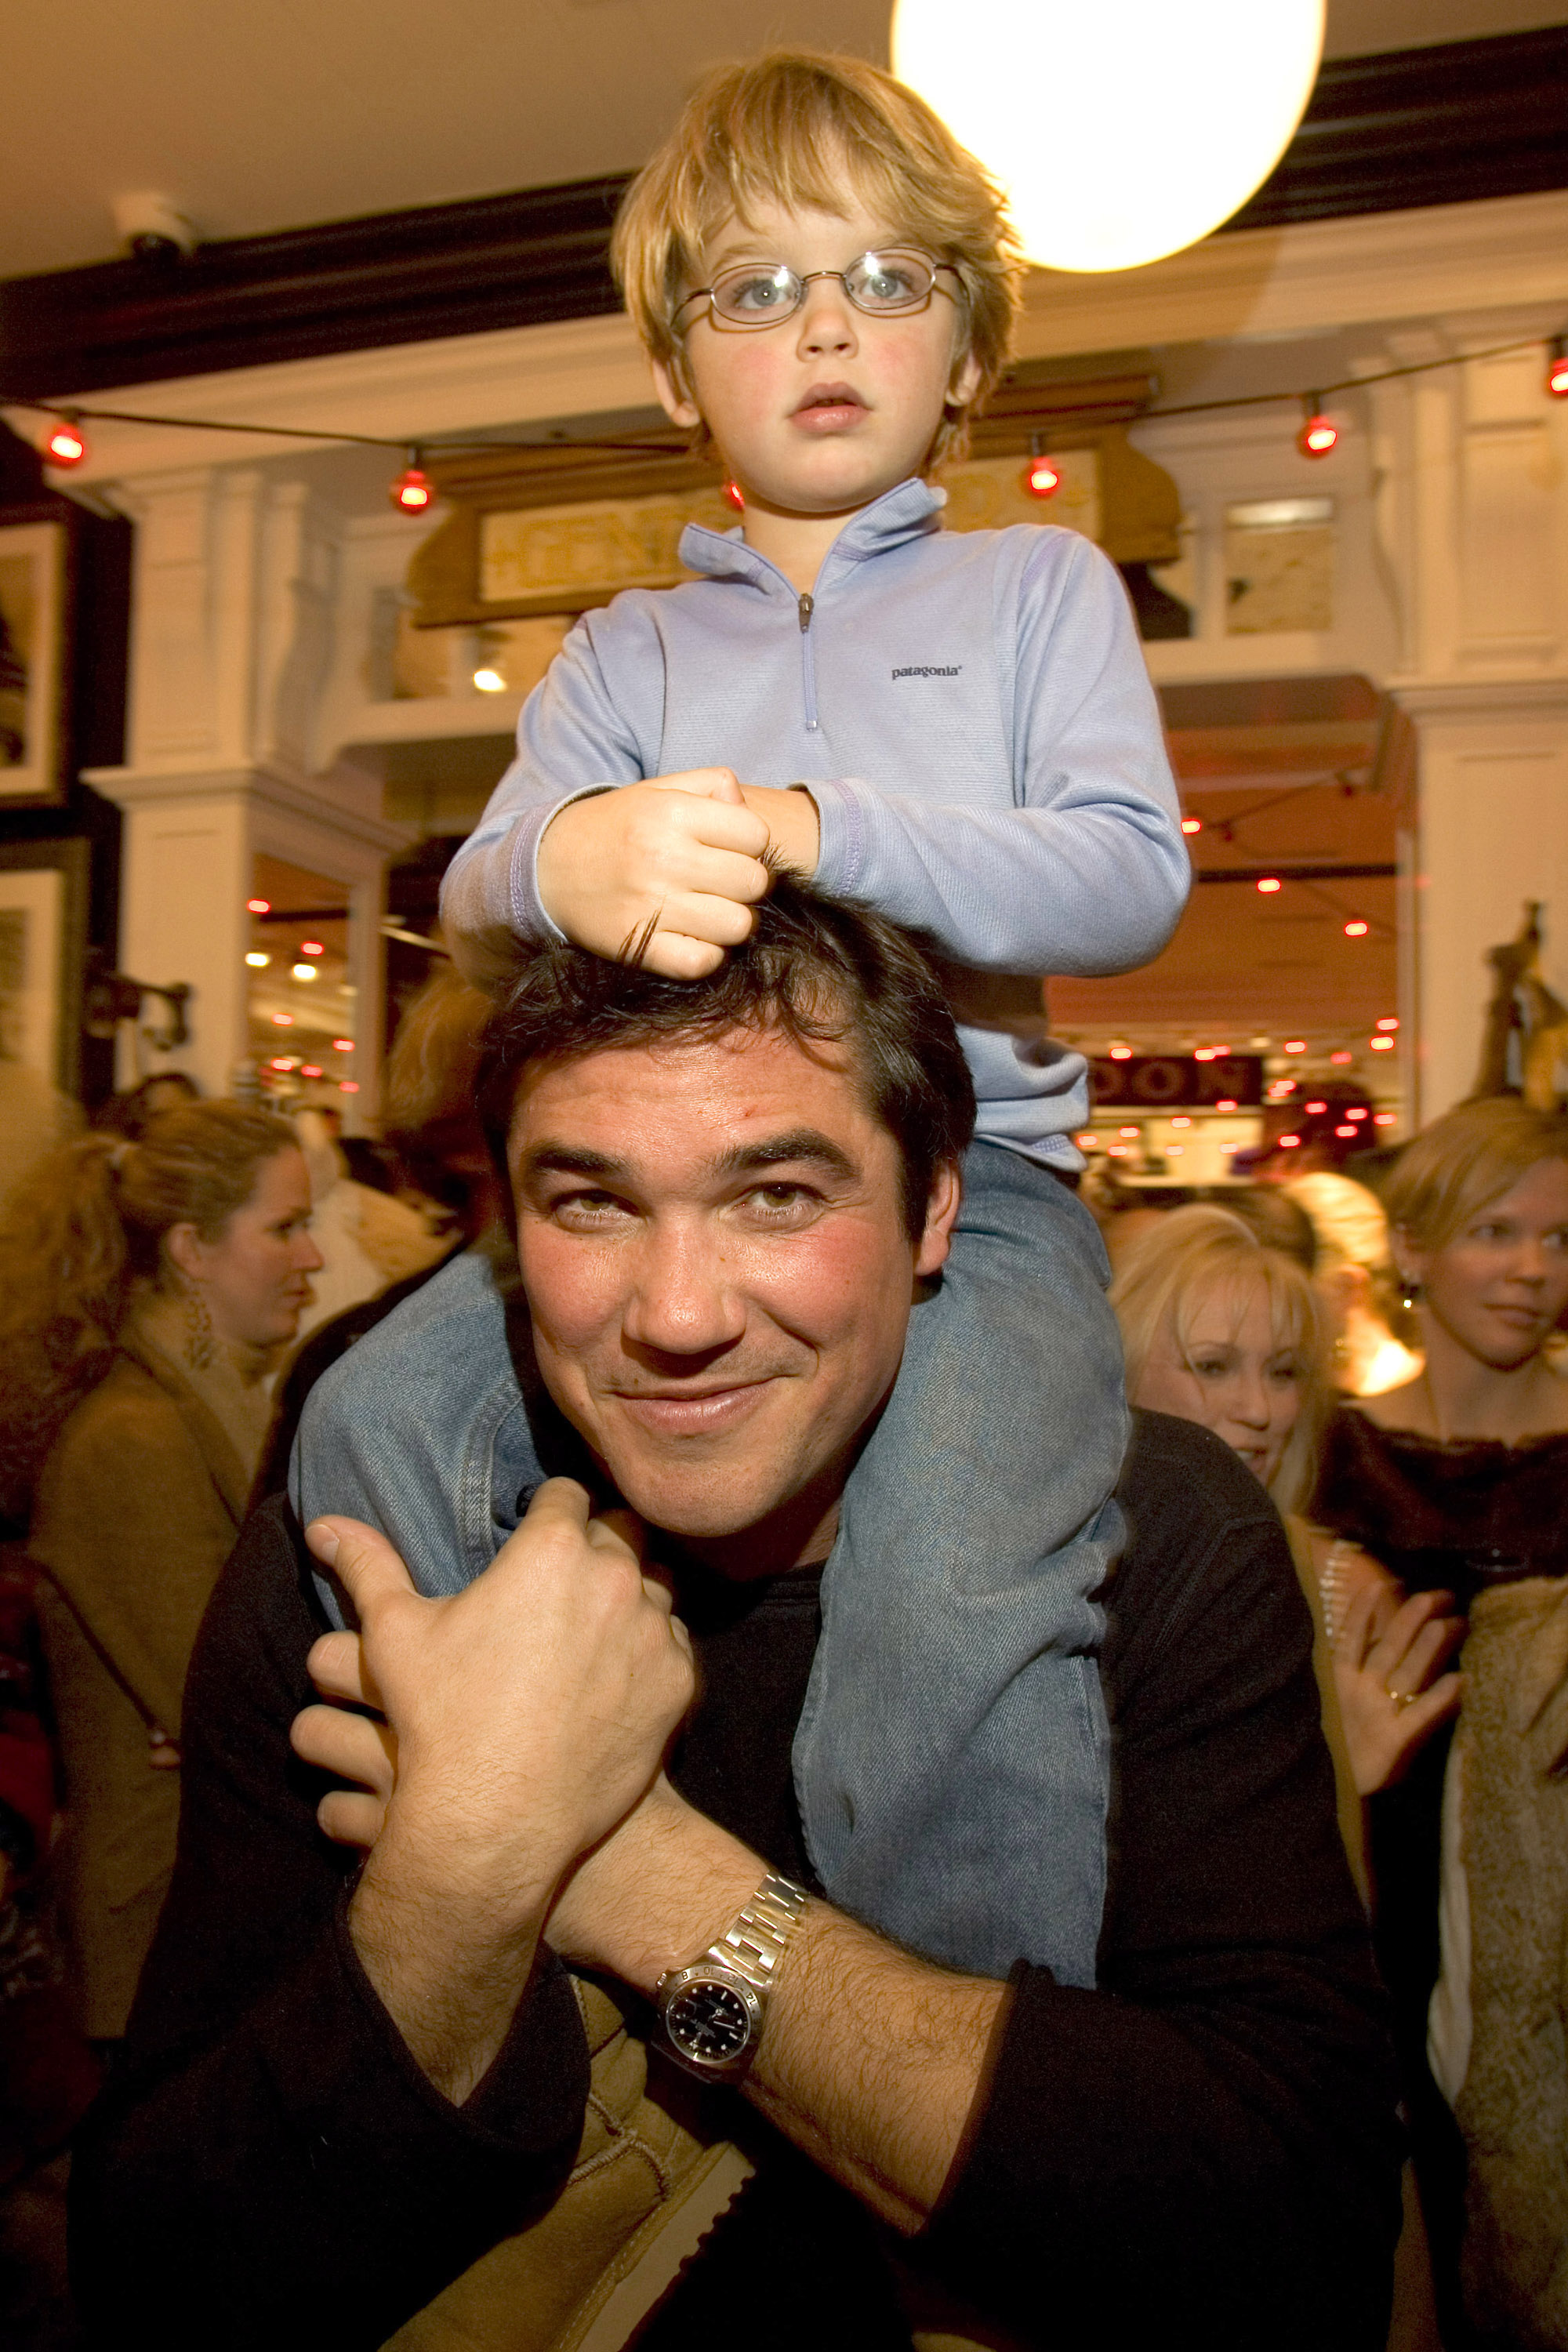 Christopher and Dean Cain at the opening of the new Ralph Lauren Aspen store in Aspen, Colorado in 2004 | Source: Getty Images